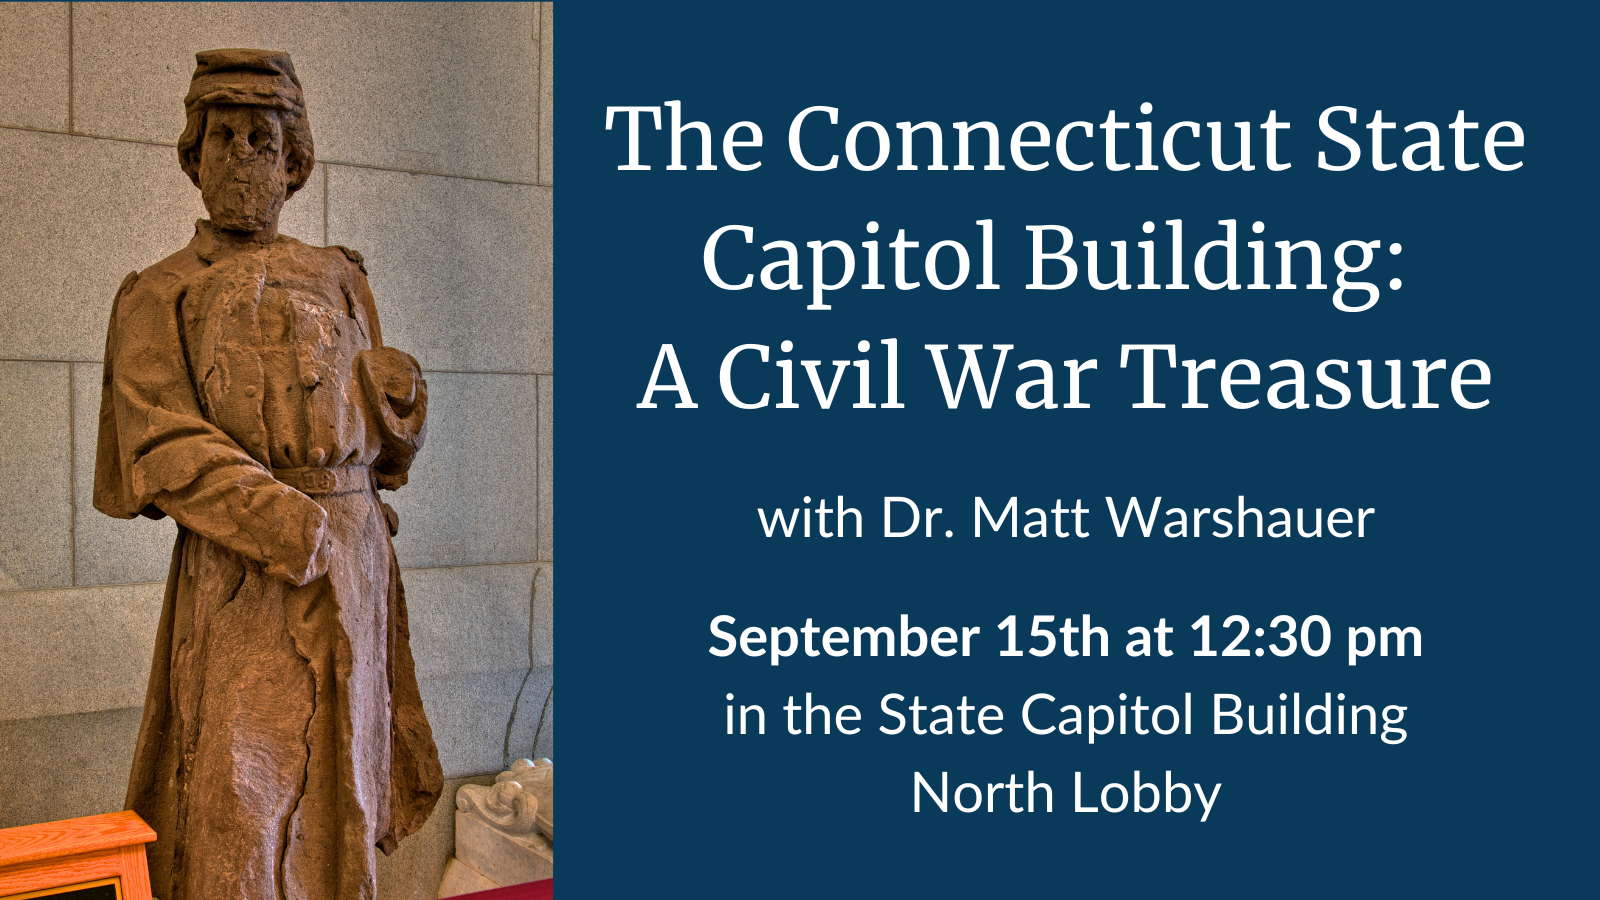 image of the forlorn soldier statue next to text that reads the Connecticut state capitol building: a civil war treasure with Dr. Matt Warshauer September 15th at 12:30 pm in the State Capitol Building North Lobby